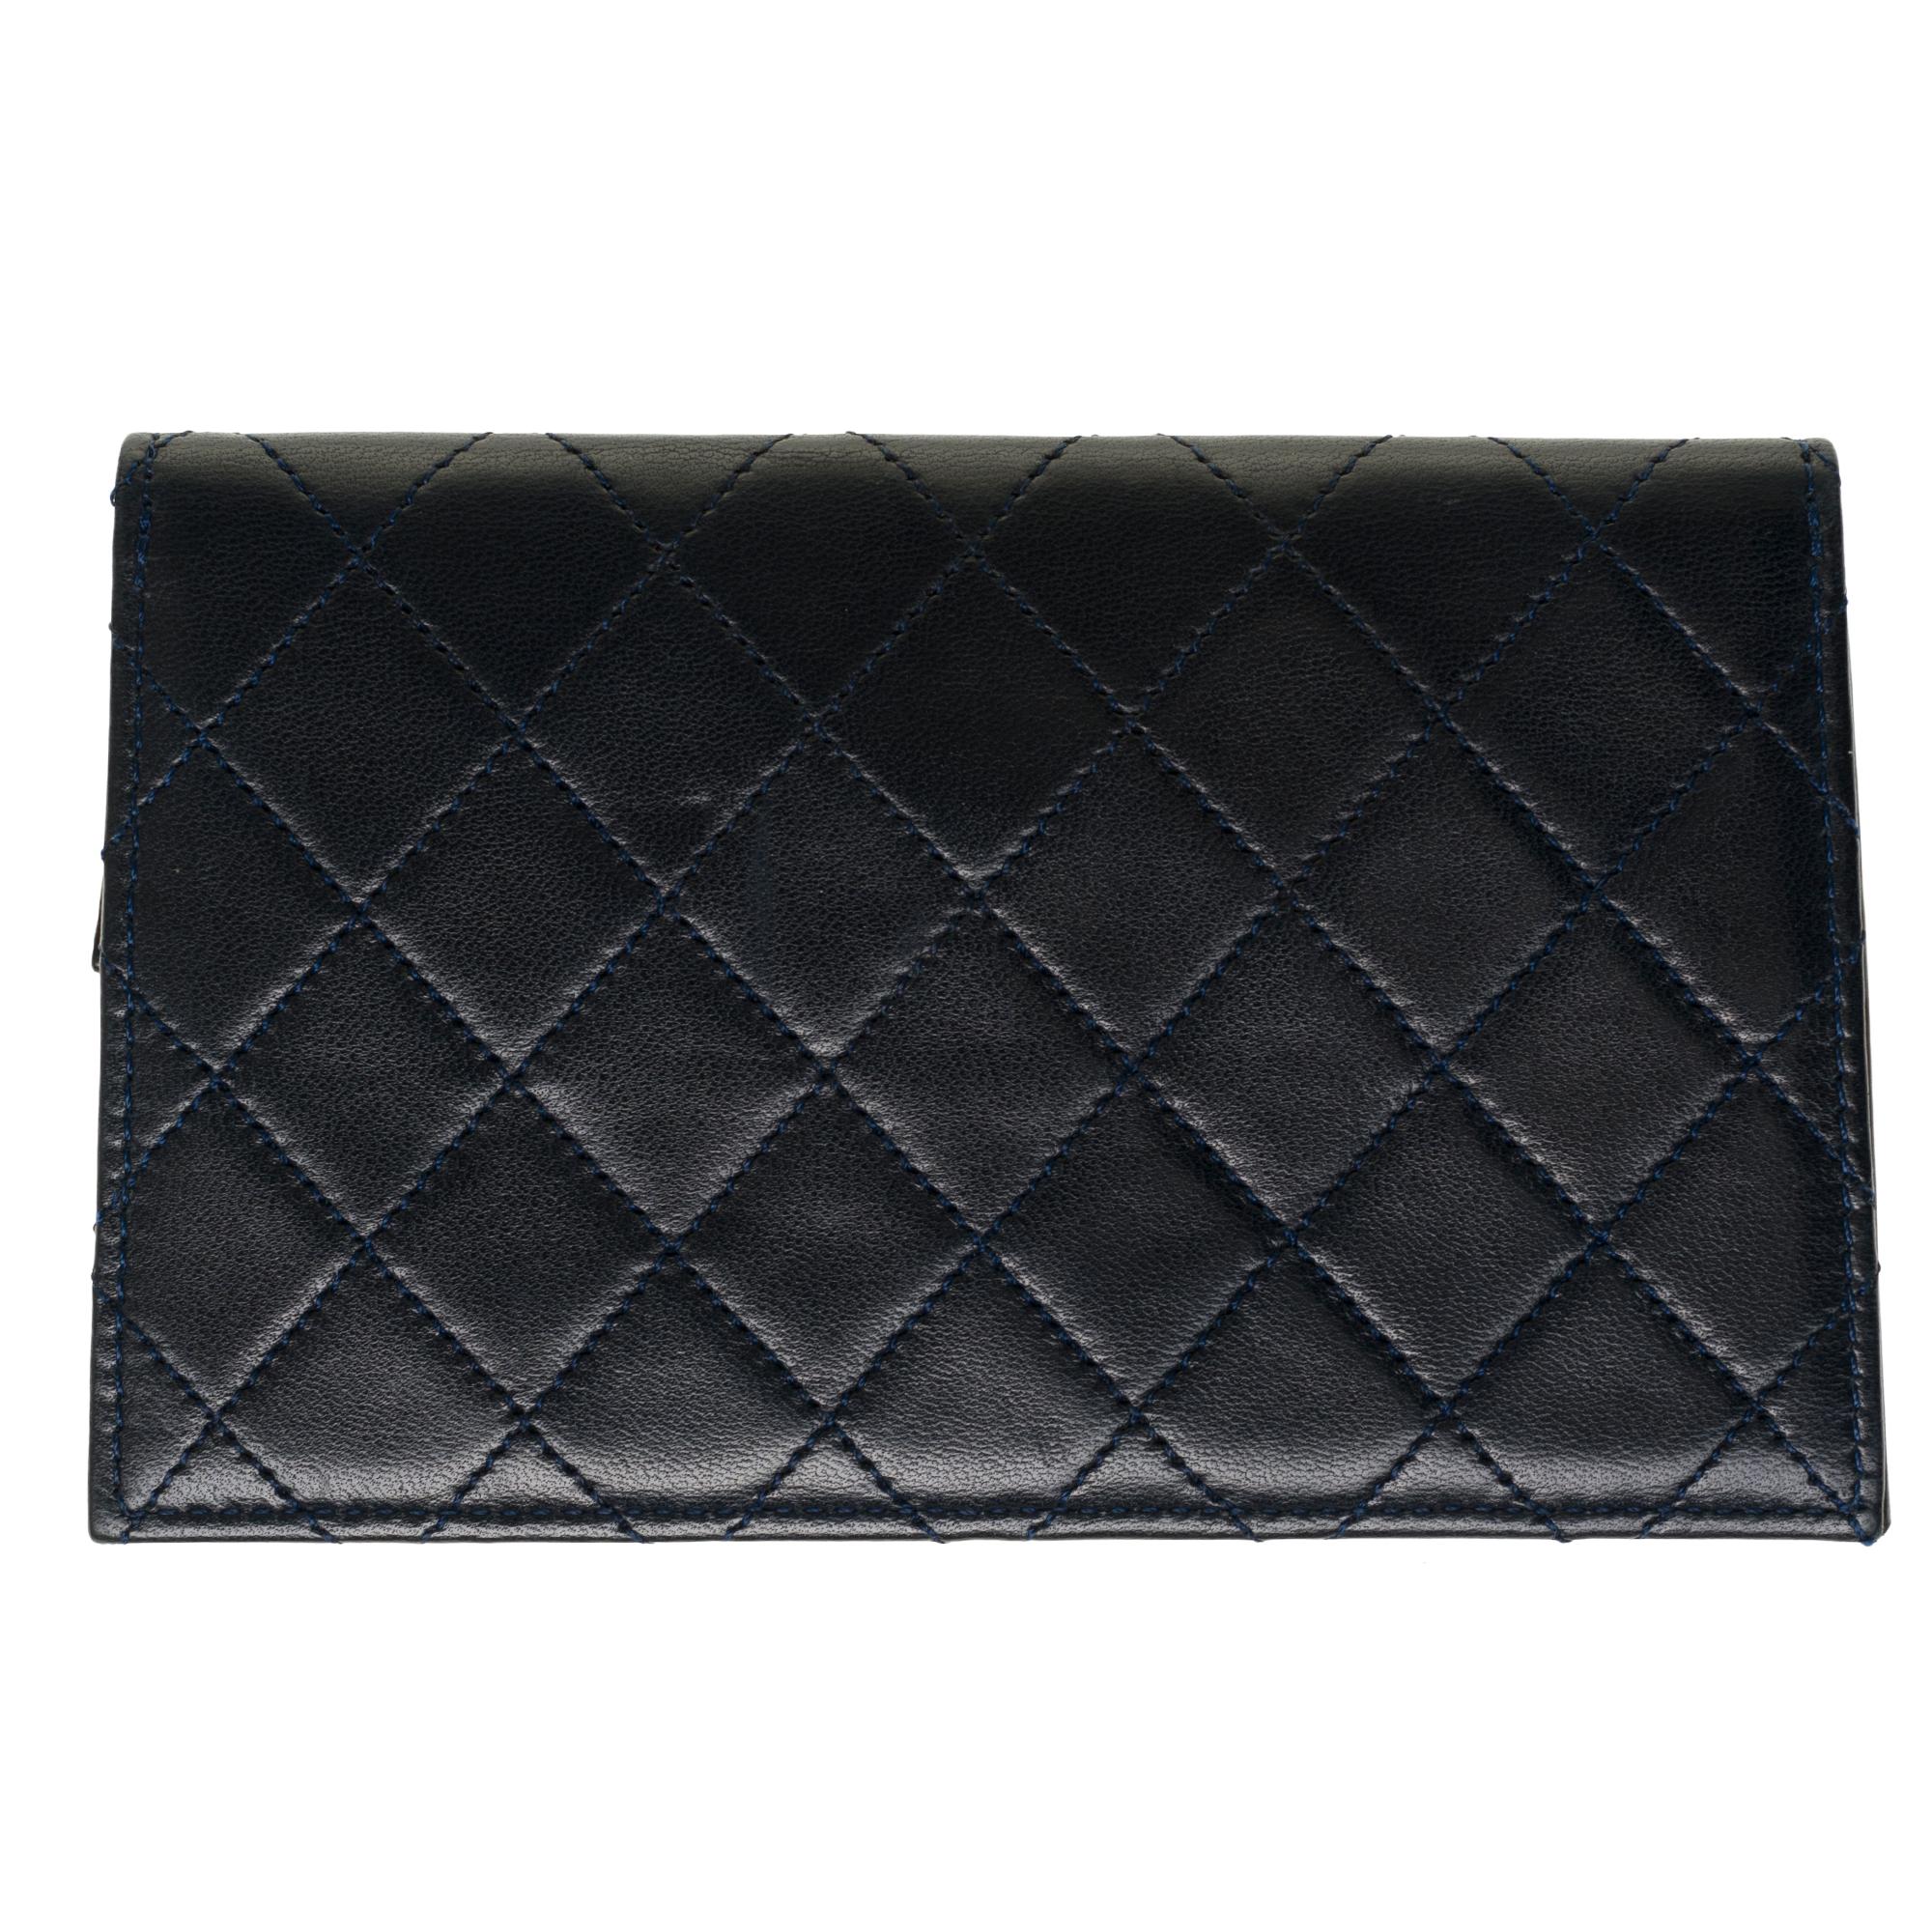 Chanel Trapezoidal shoulder flap bag in navy blue quilted lambskin leather, GHW 9